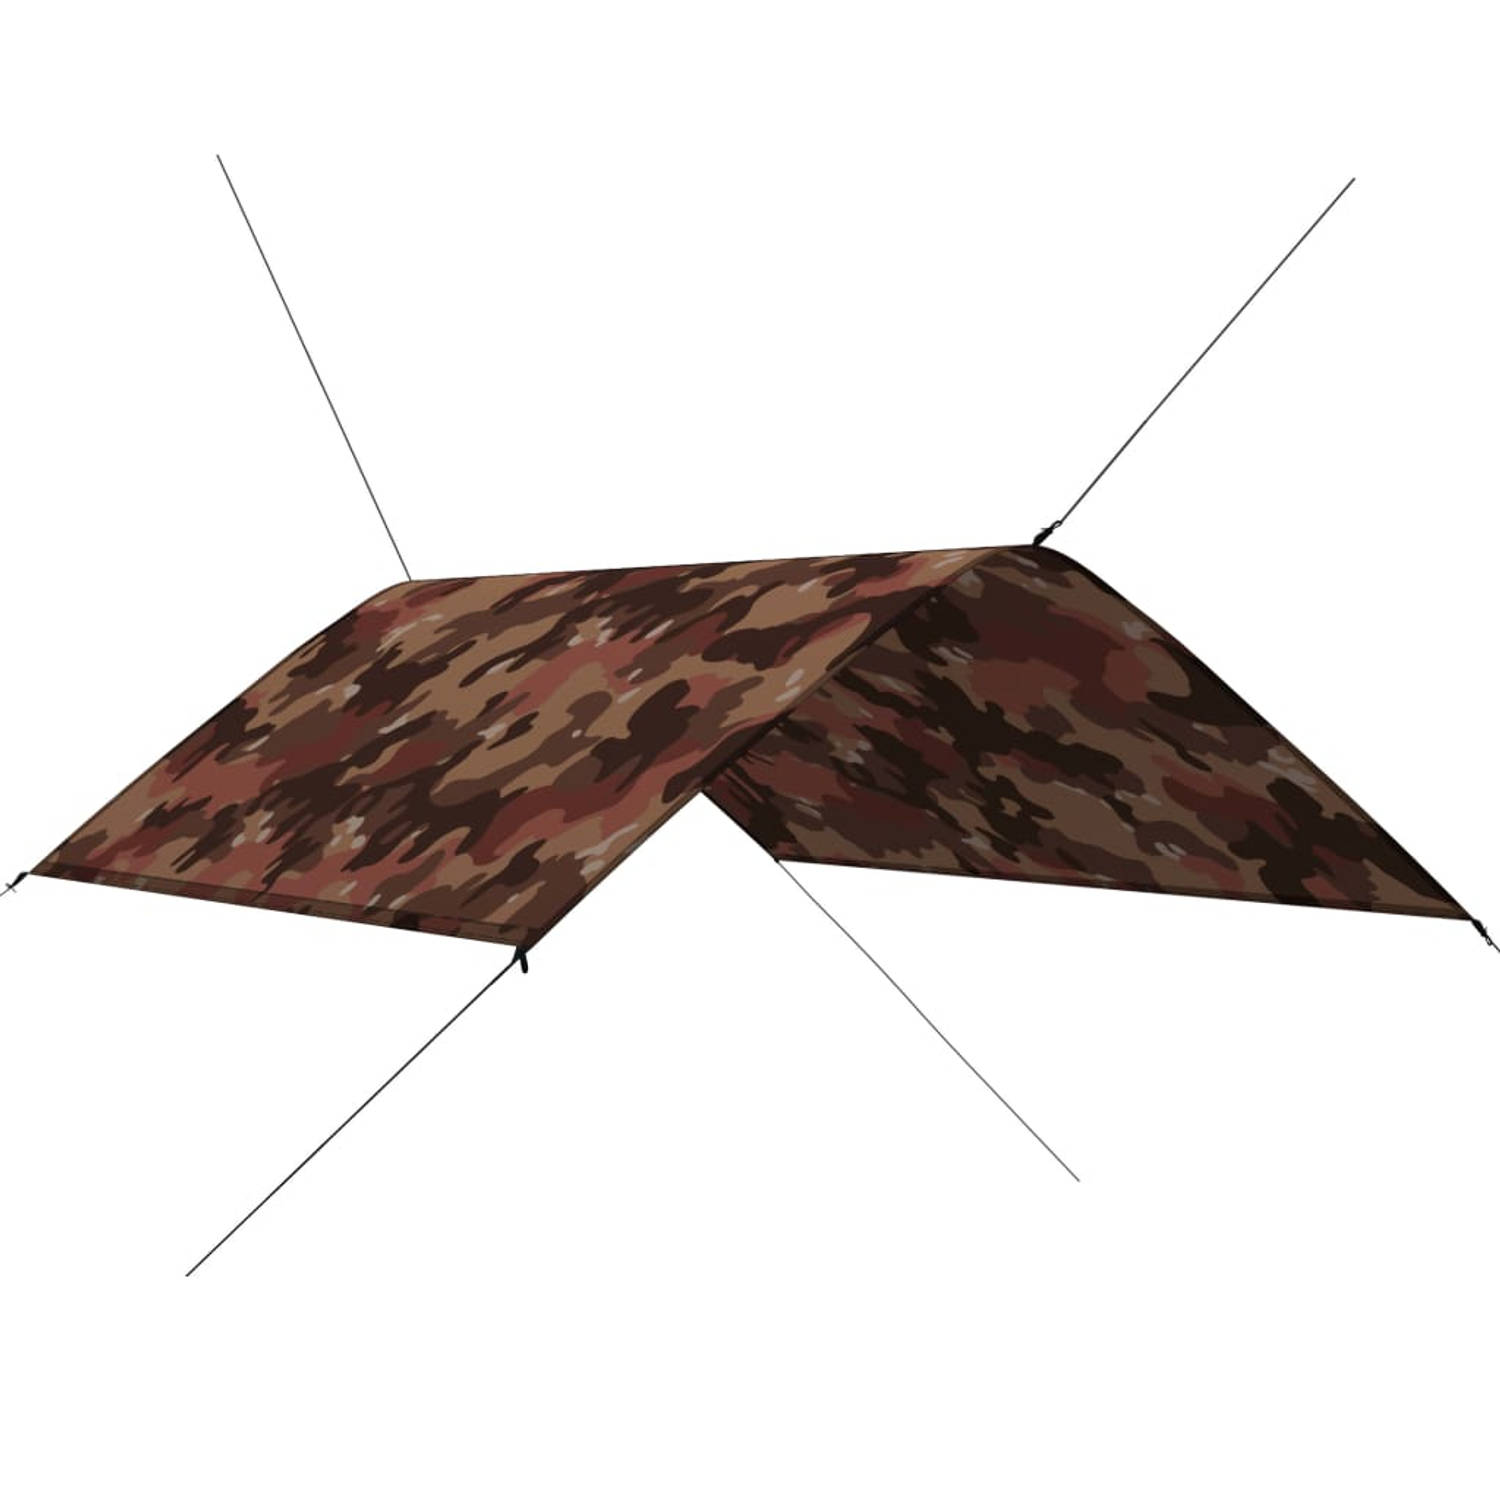 The Living Store Tuinzeil Camouflage - Polyester - 300 x 200 cm - Uv-bestendig